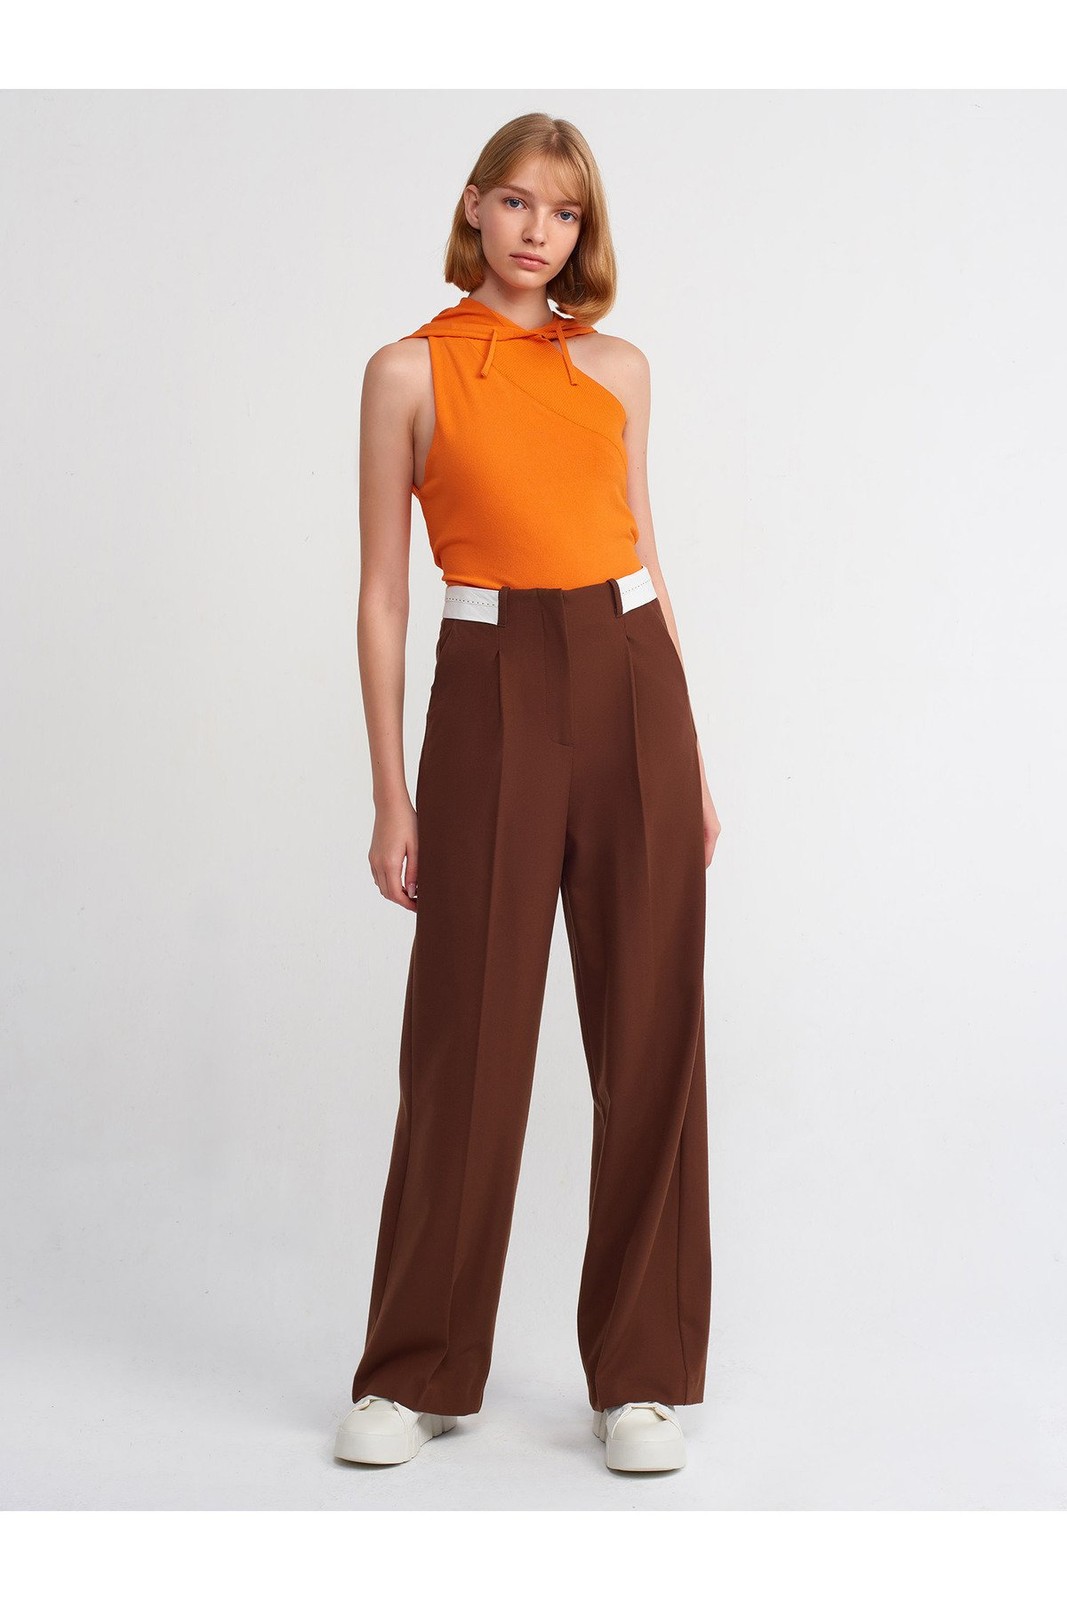 Dilvin 71219 Curved Belt Trousers-Brown